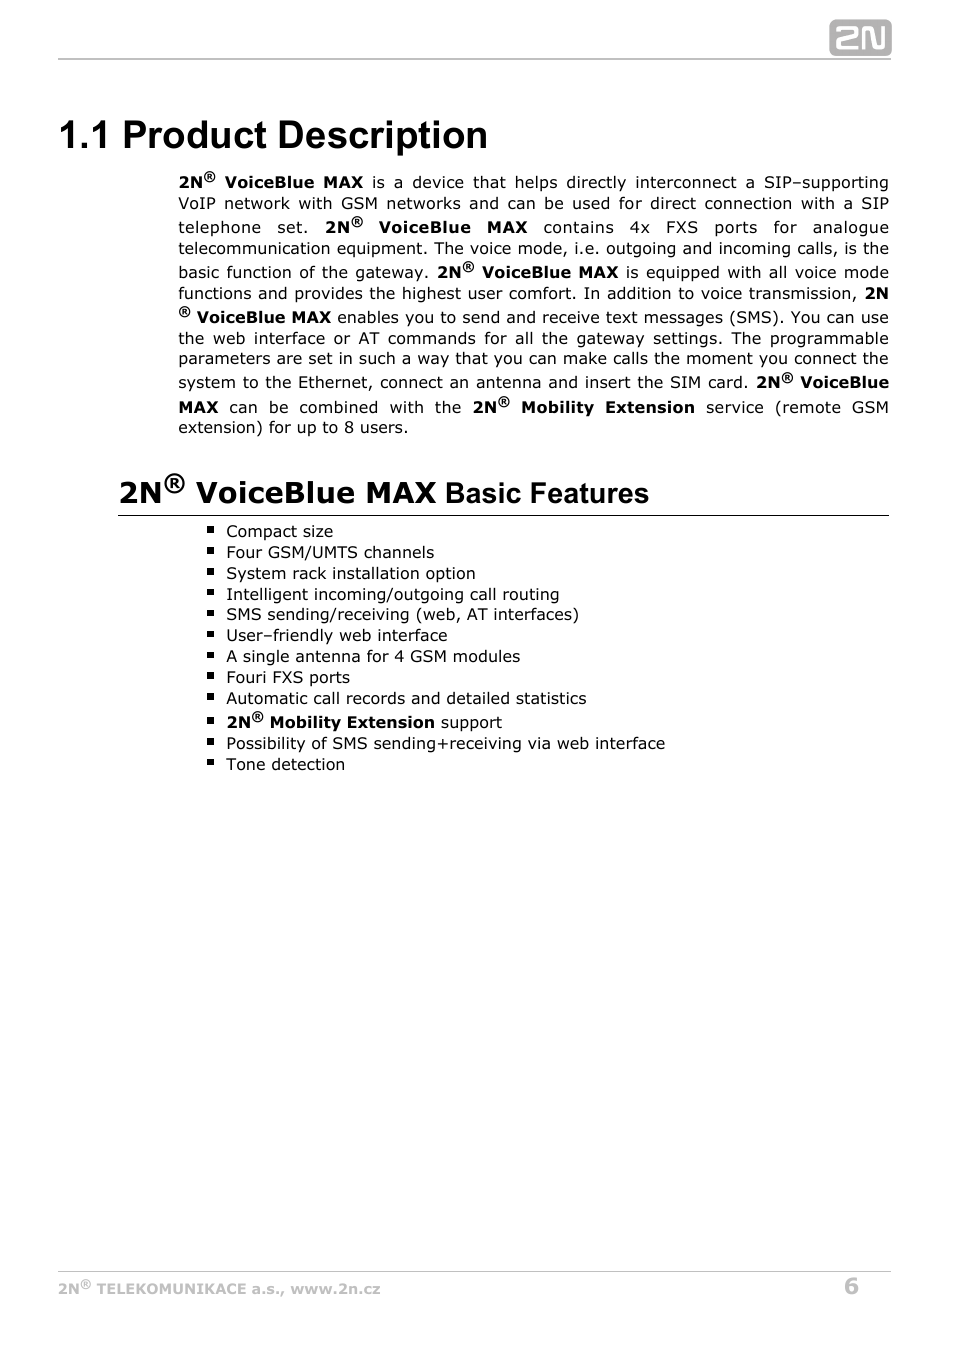 1 product description, 2n voiceblue max, Basic features | 2N VoiceBlue MAX v1.2 User Manual | Page 6 / 111